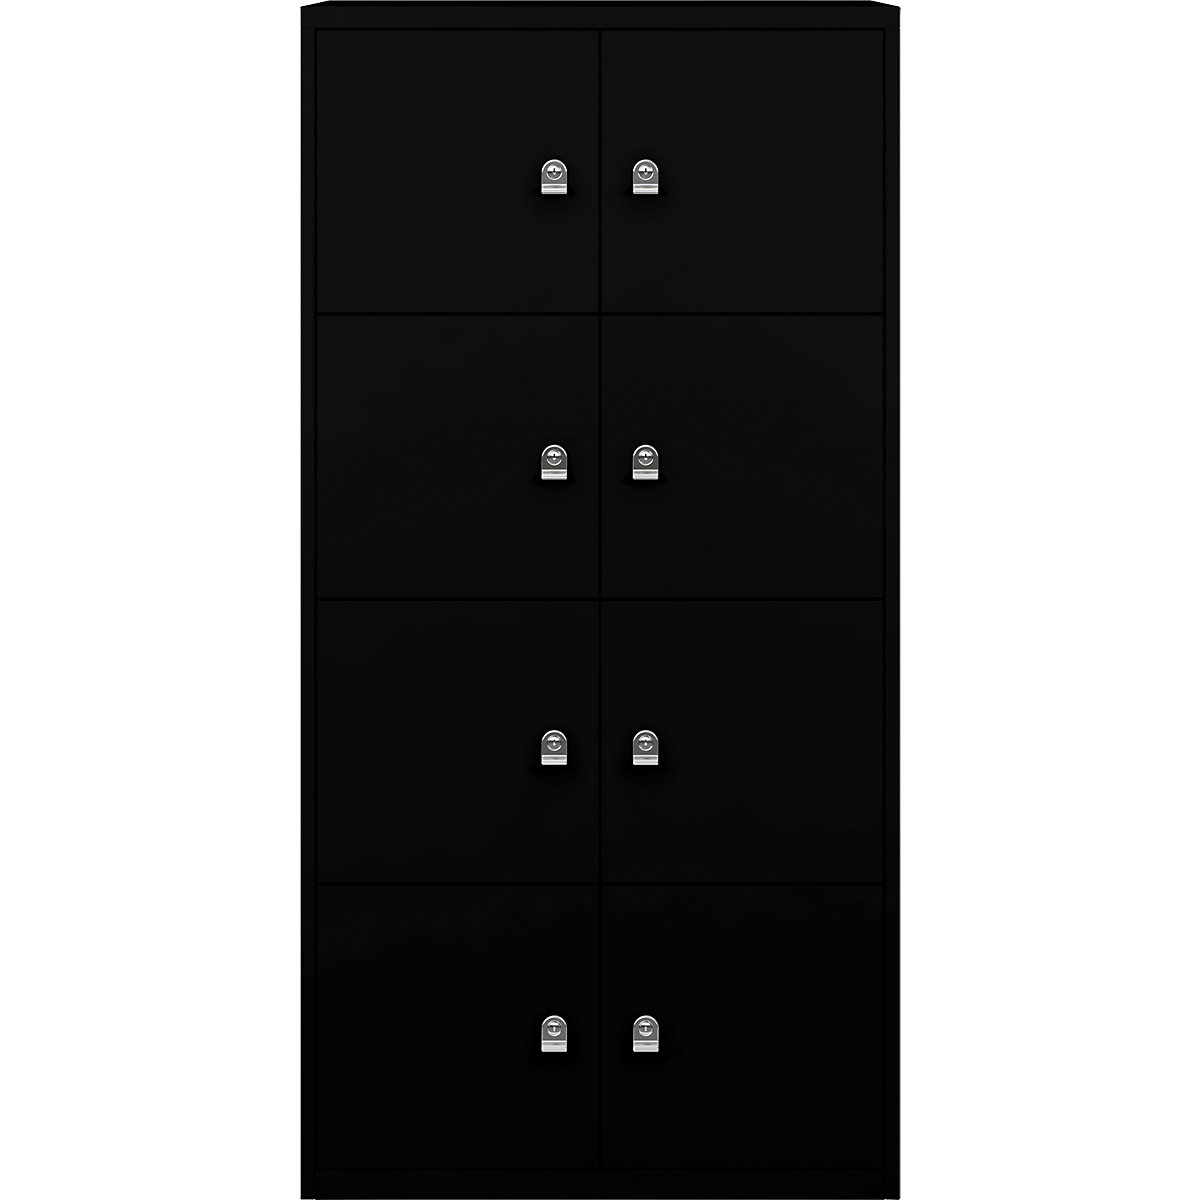 BISLEY – LateralFile™ lodge, with 8 lockable compartments, height 375 mm each, black